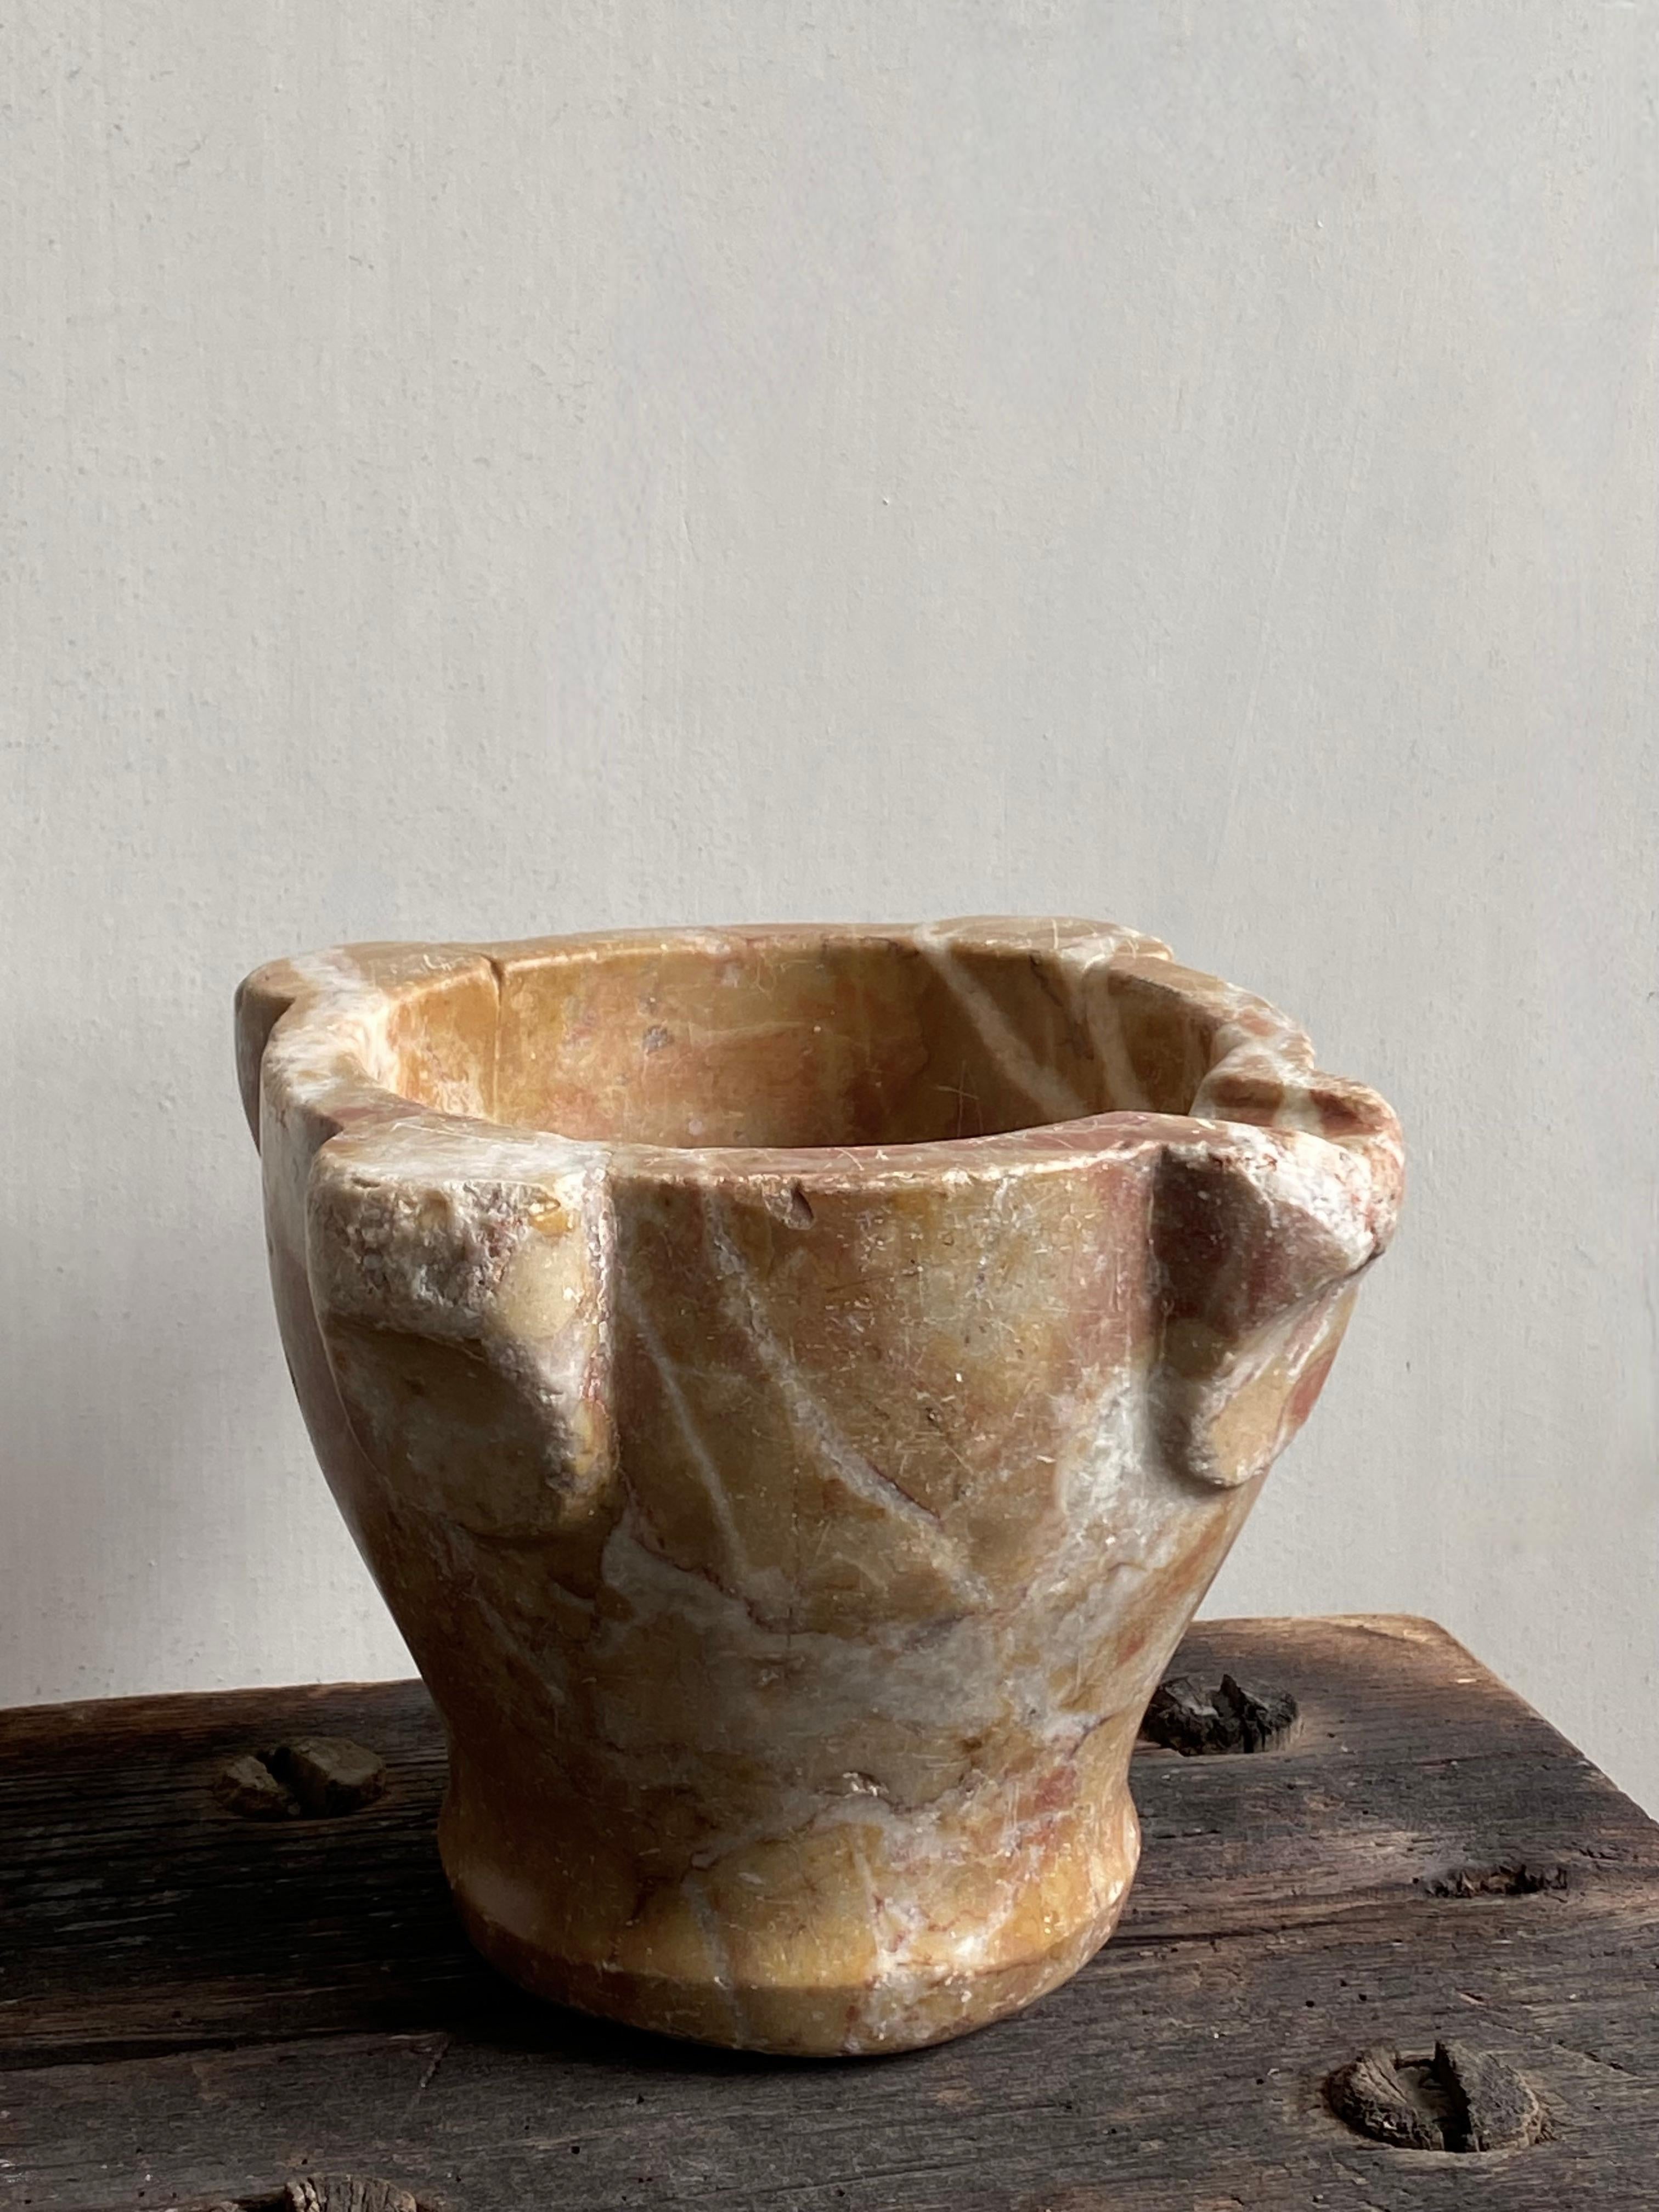 This 18th century Italian pharmacist's mortar is a unique piece of its kind.
The warm color of the marble type is rare and reflects the beautifully carved ears. An elegant representation of a utensil that has weathered through age and use.


Free